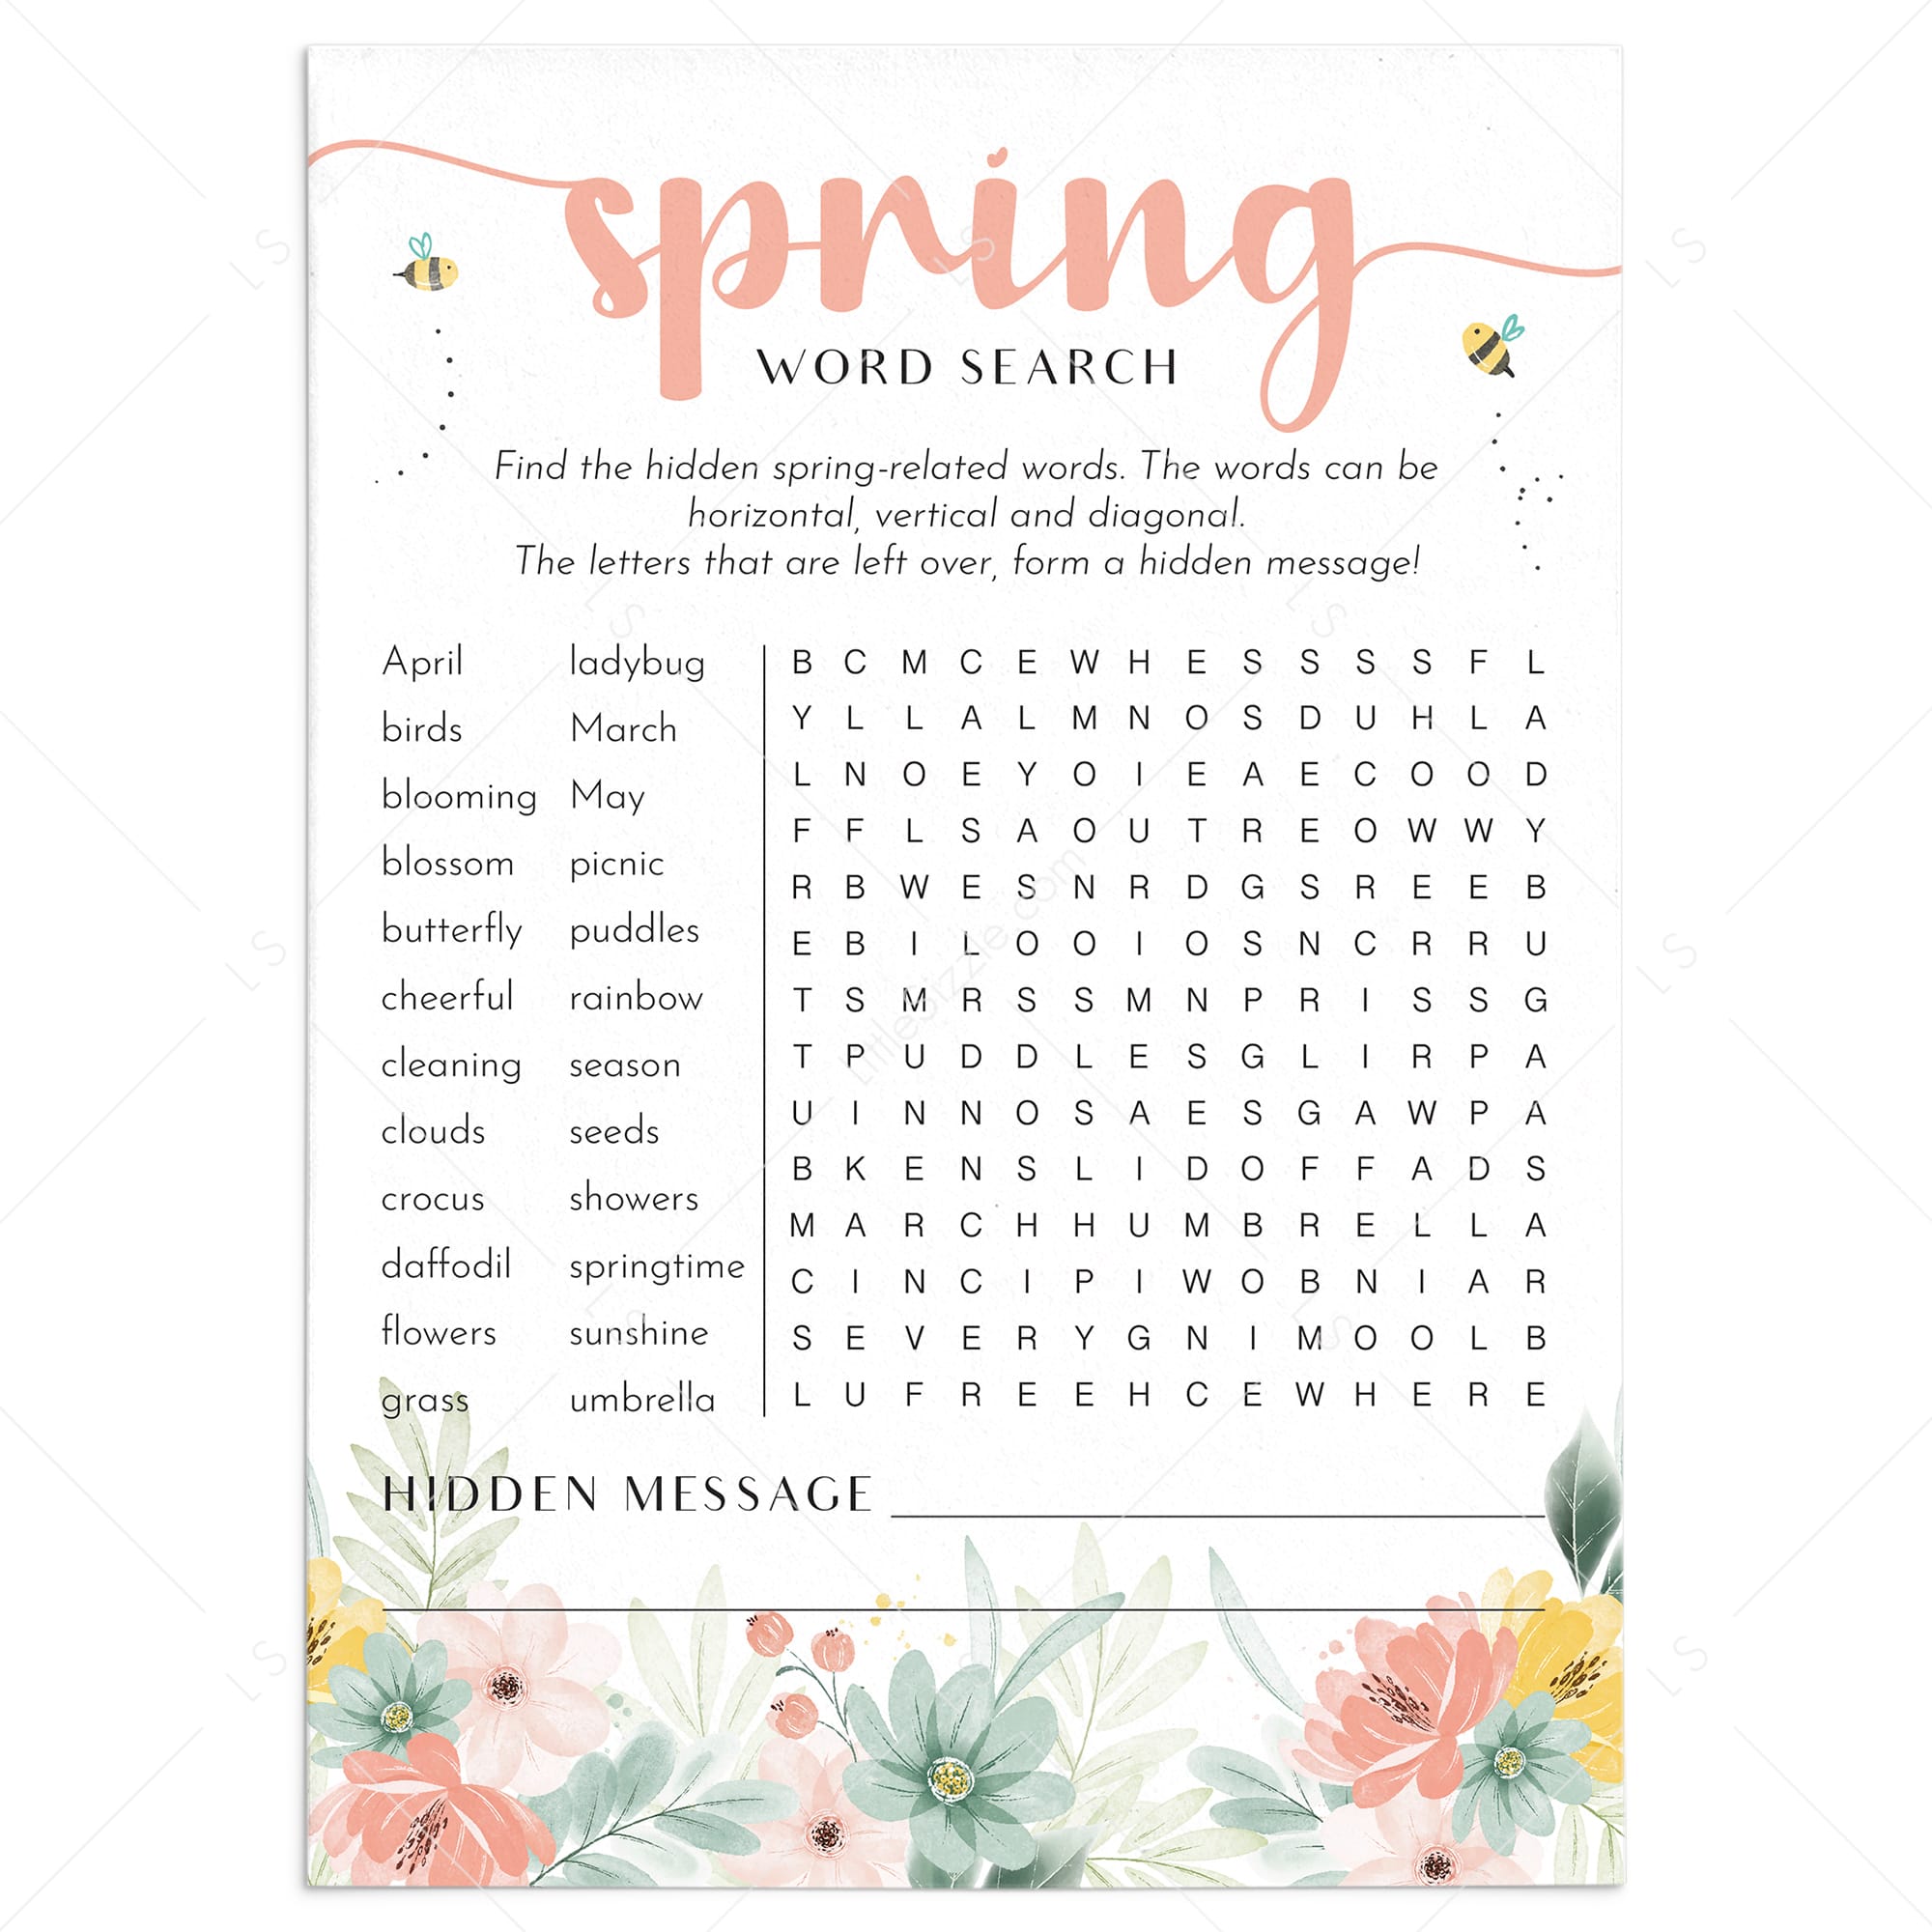 Spring Word Search with Hidden Message Printable by LittleSizzle